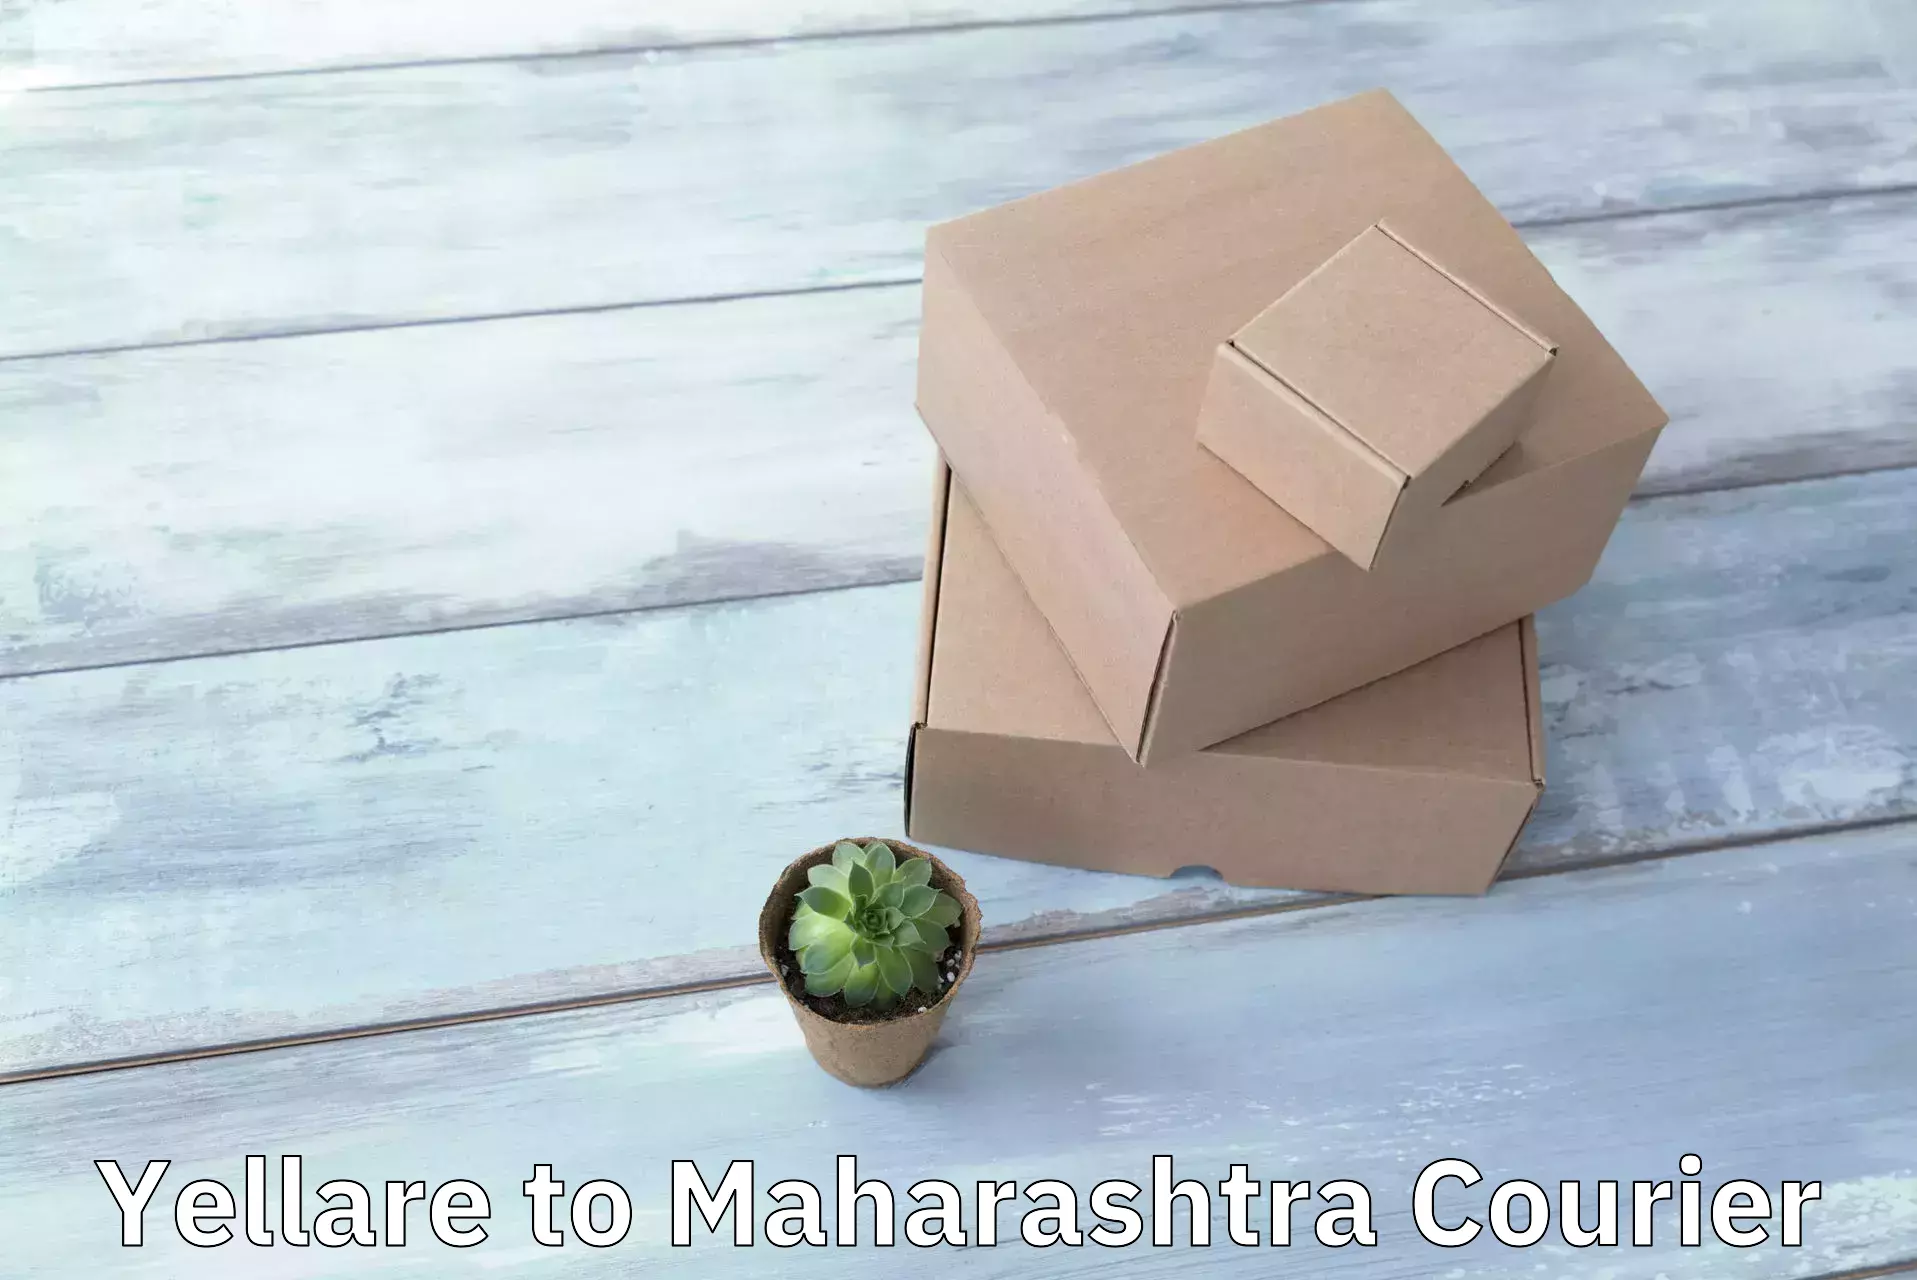 On-time delivery services Yellare to Mahabaleshwar